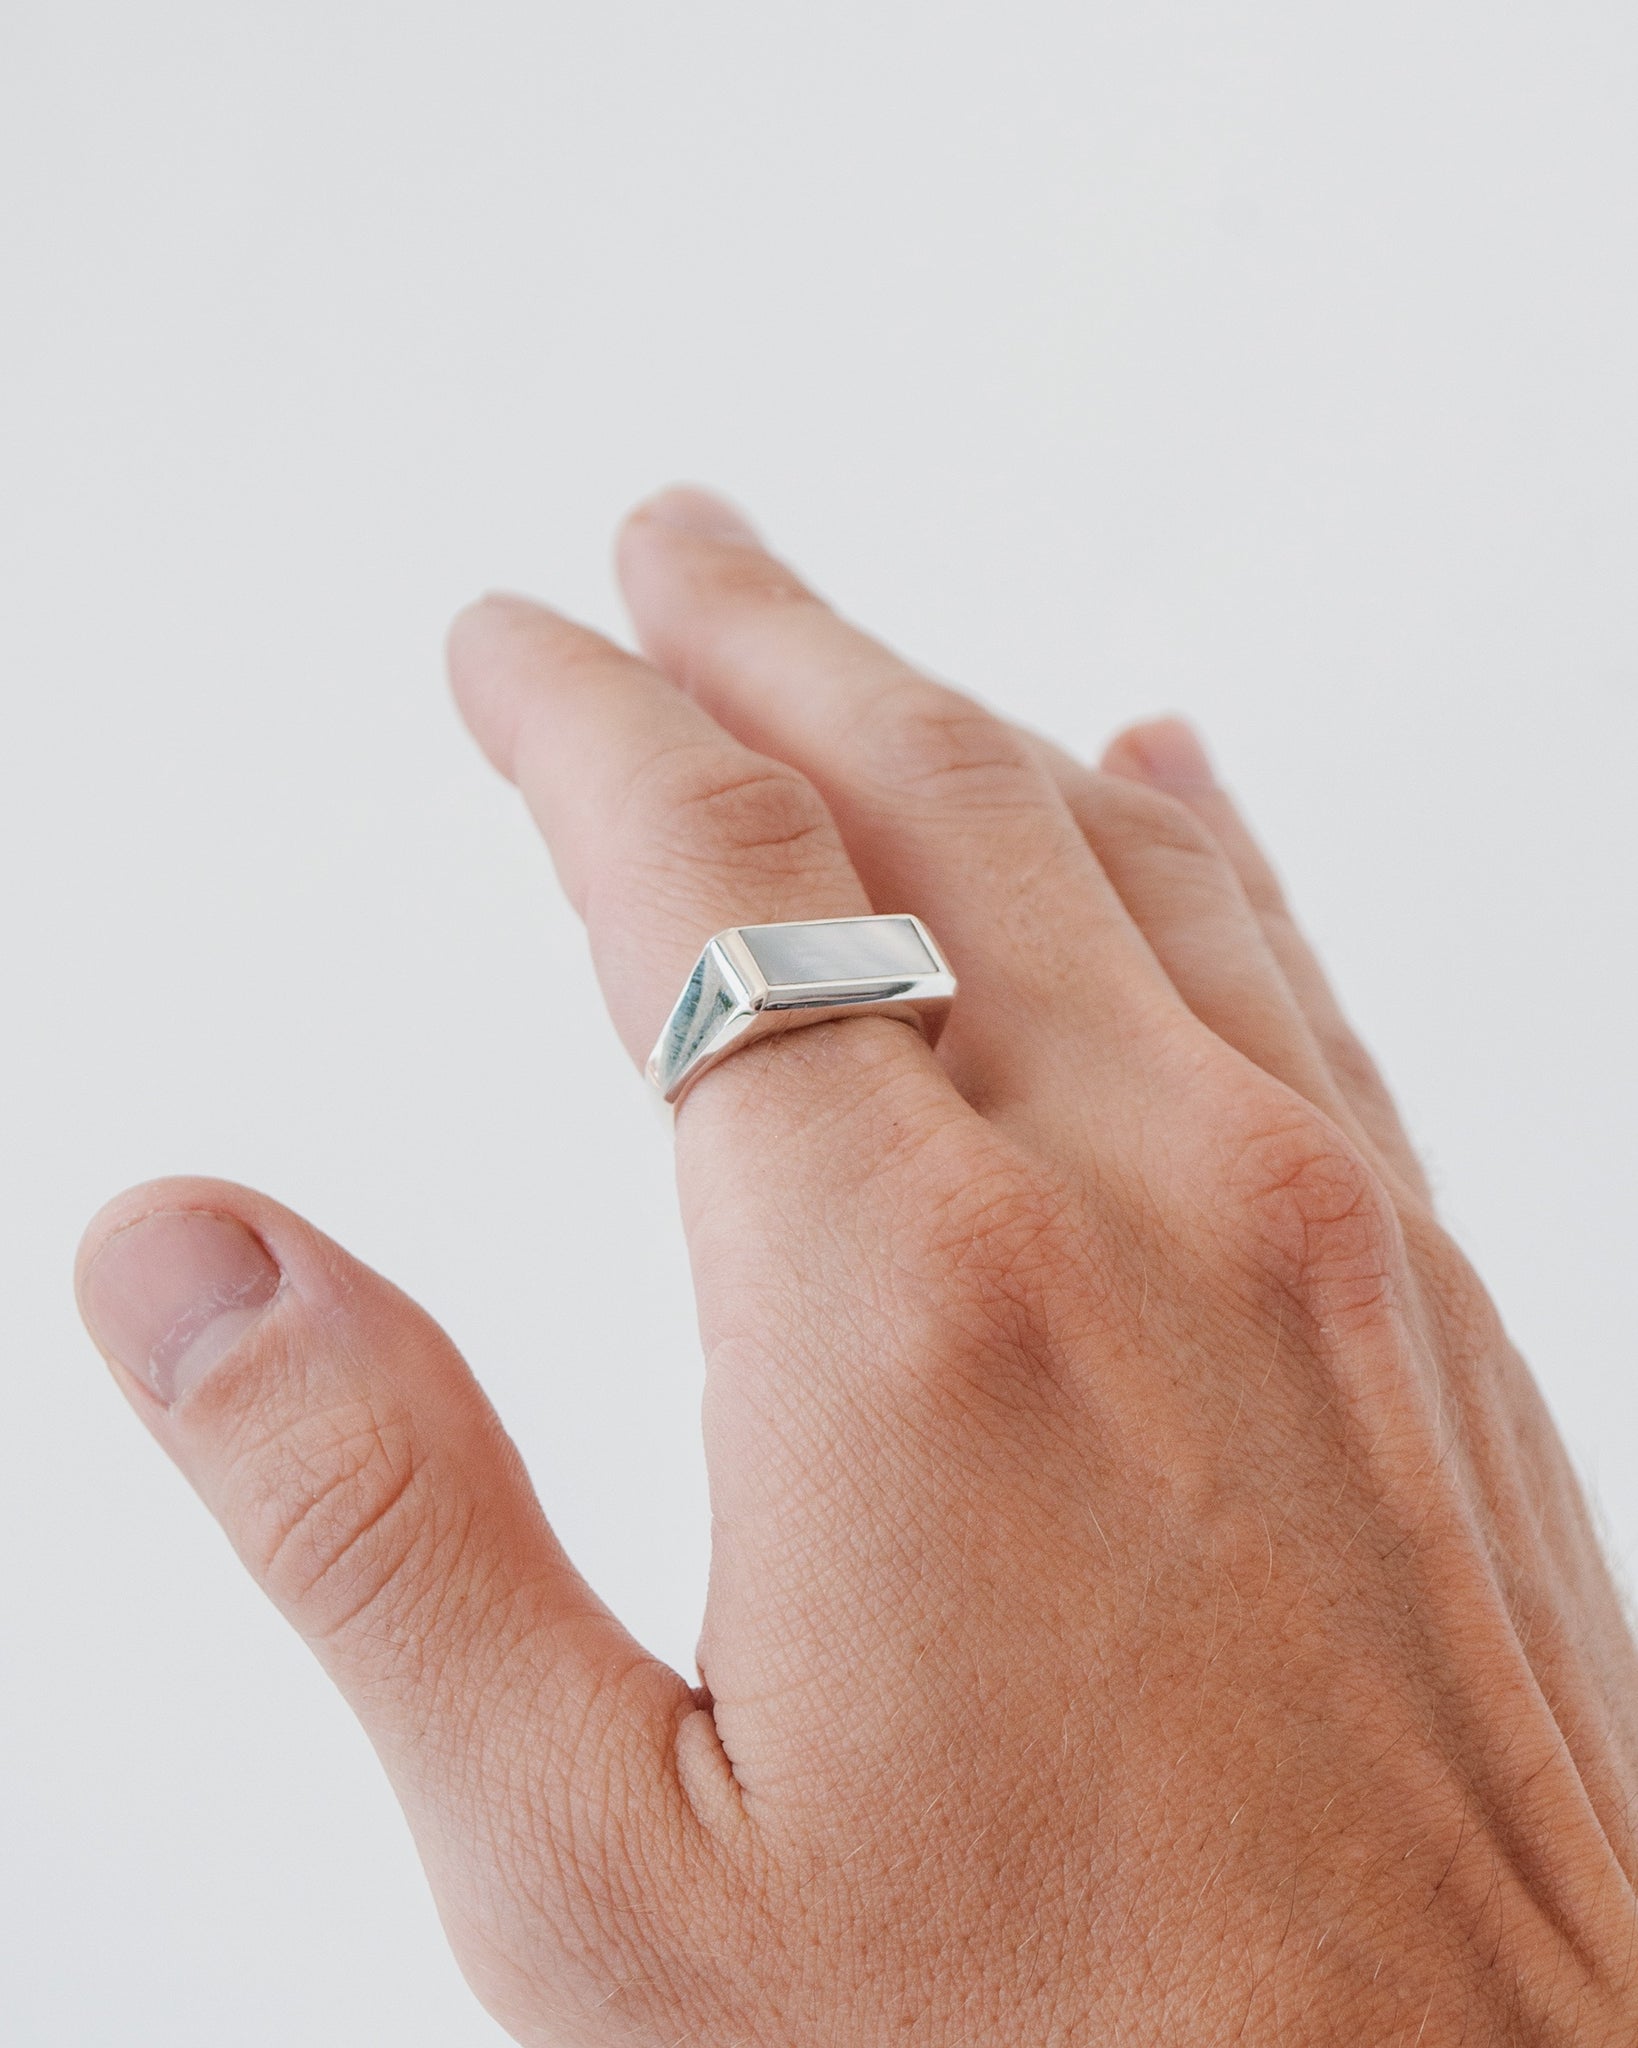 BASIN RING | MOTHER OF PEARL